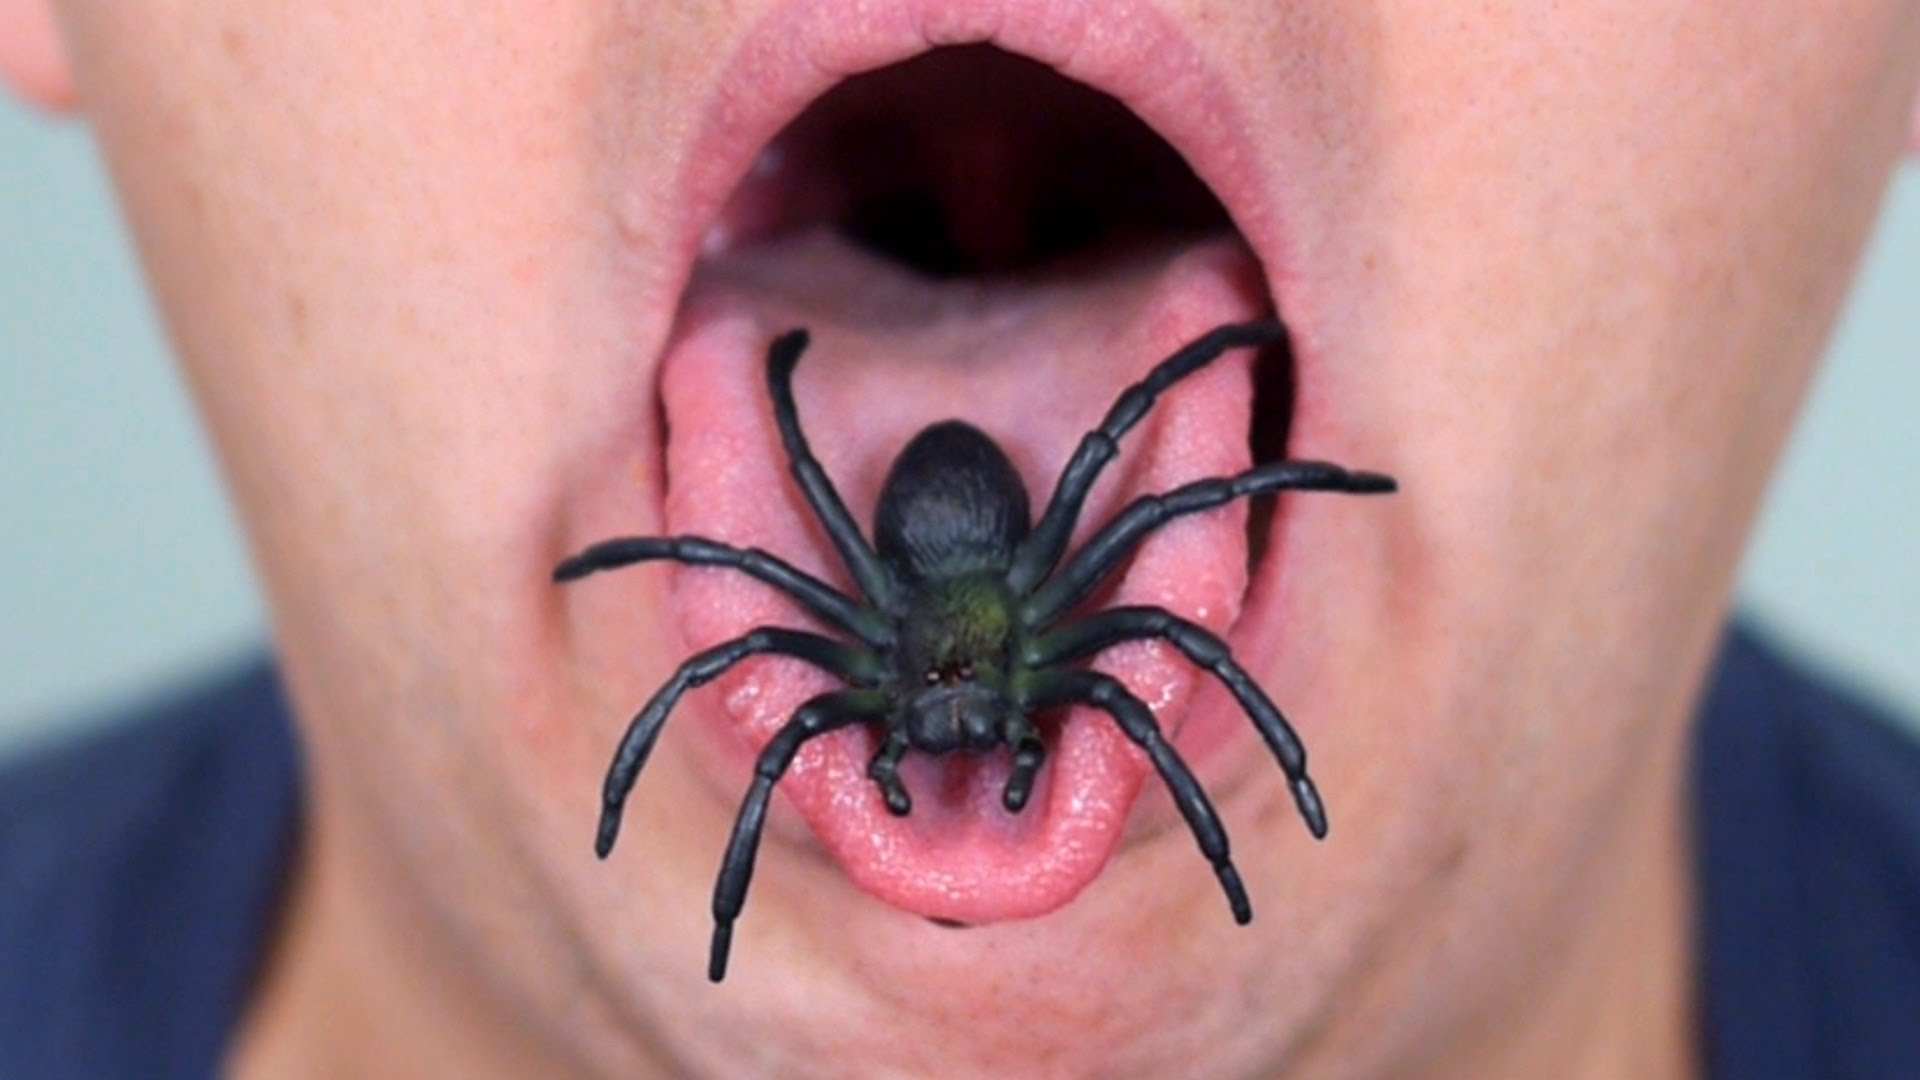 SPIDER IN MOUTH! - YouTube